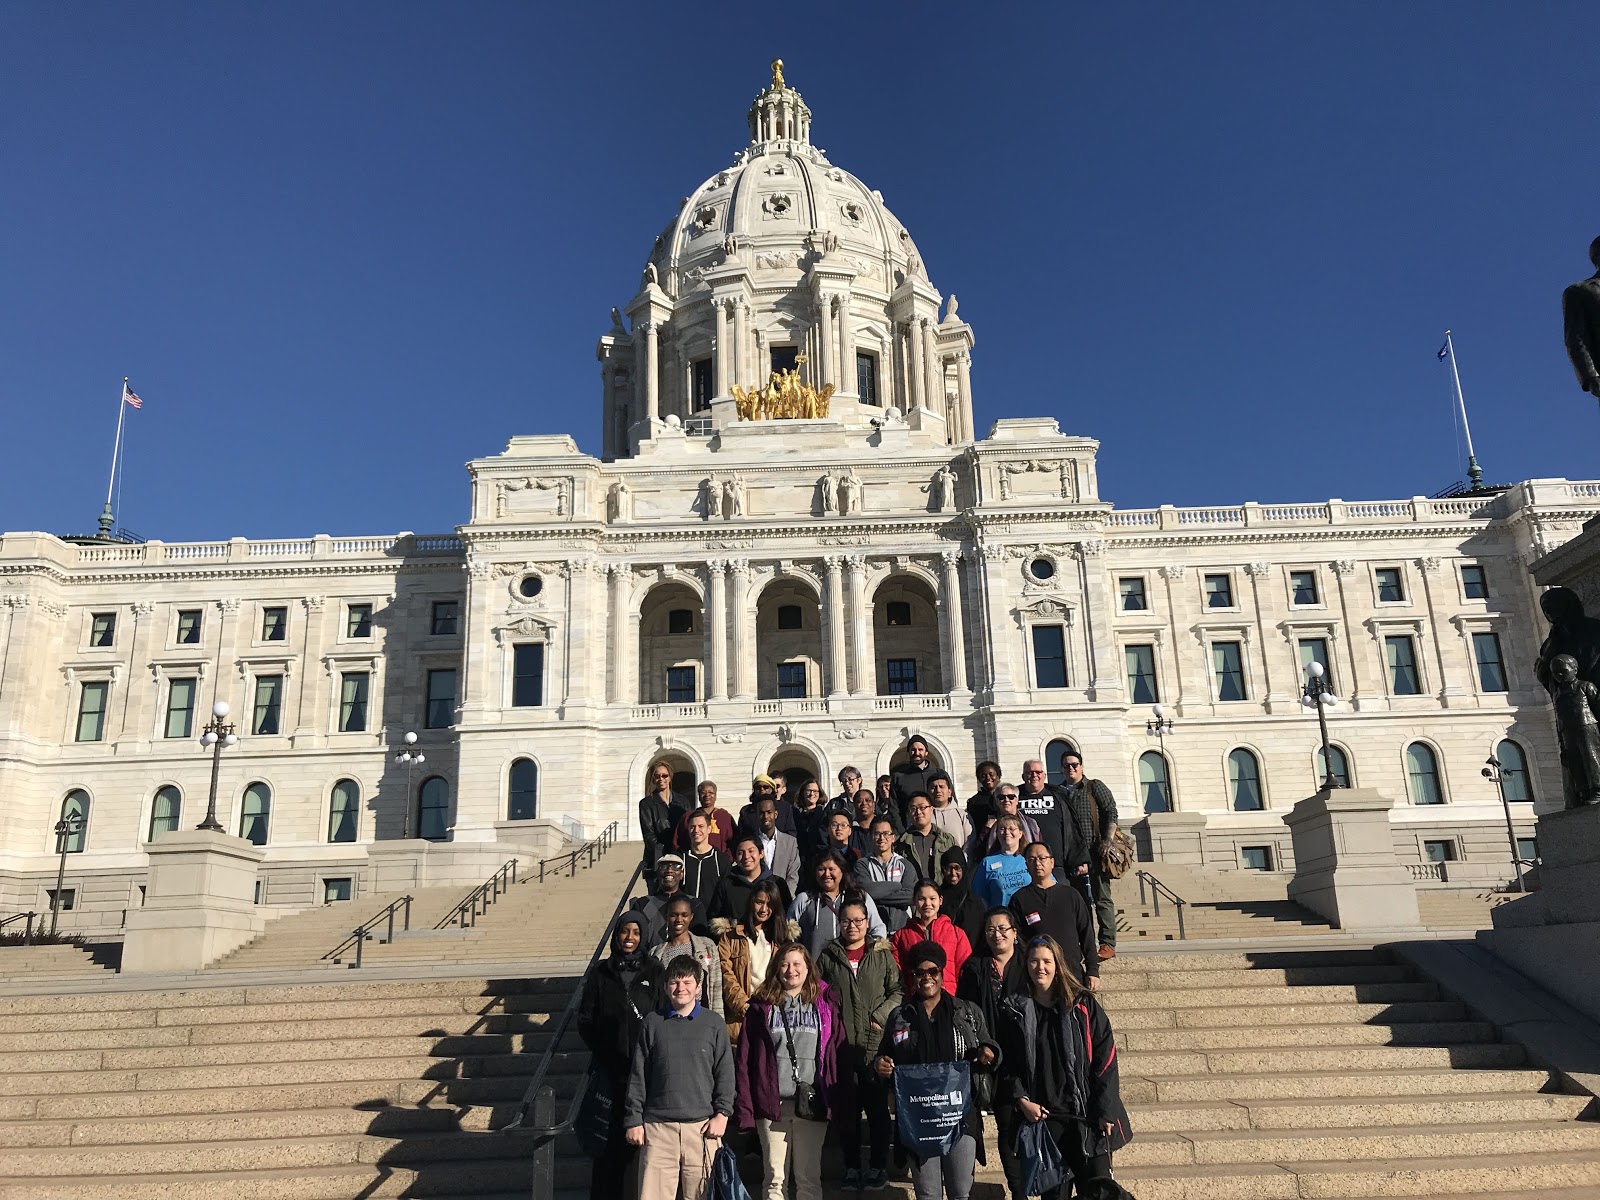 Capturing Capitol lessons in leadership